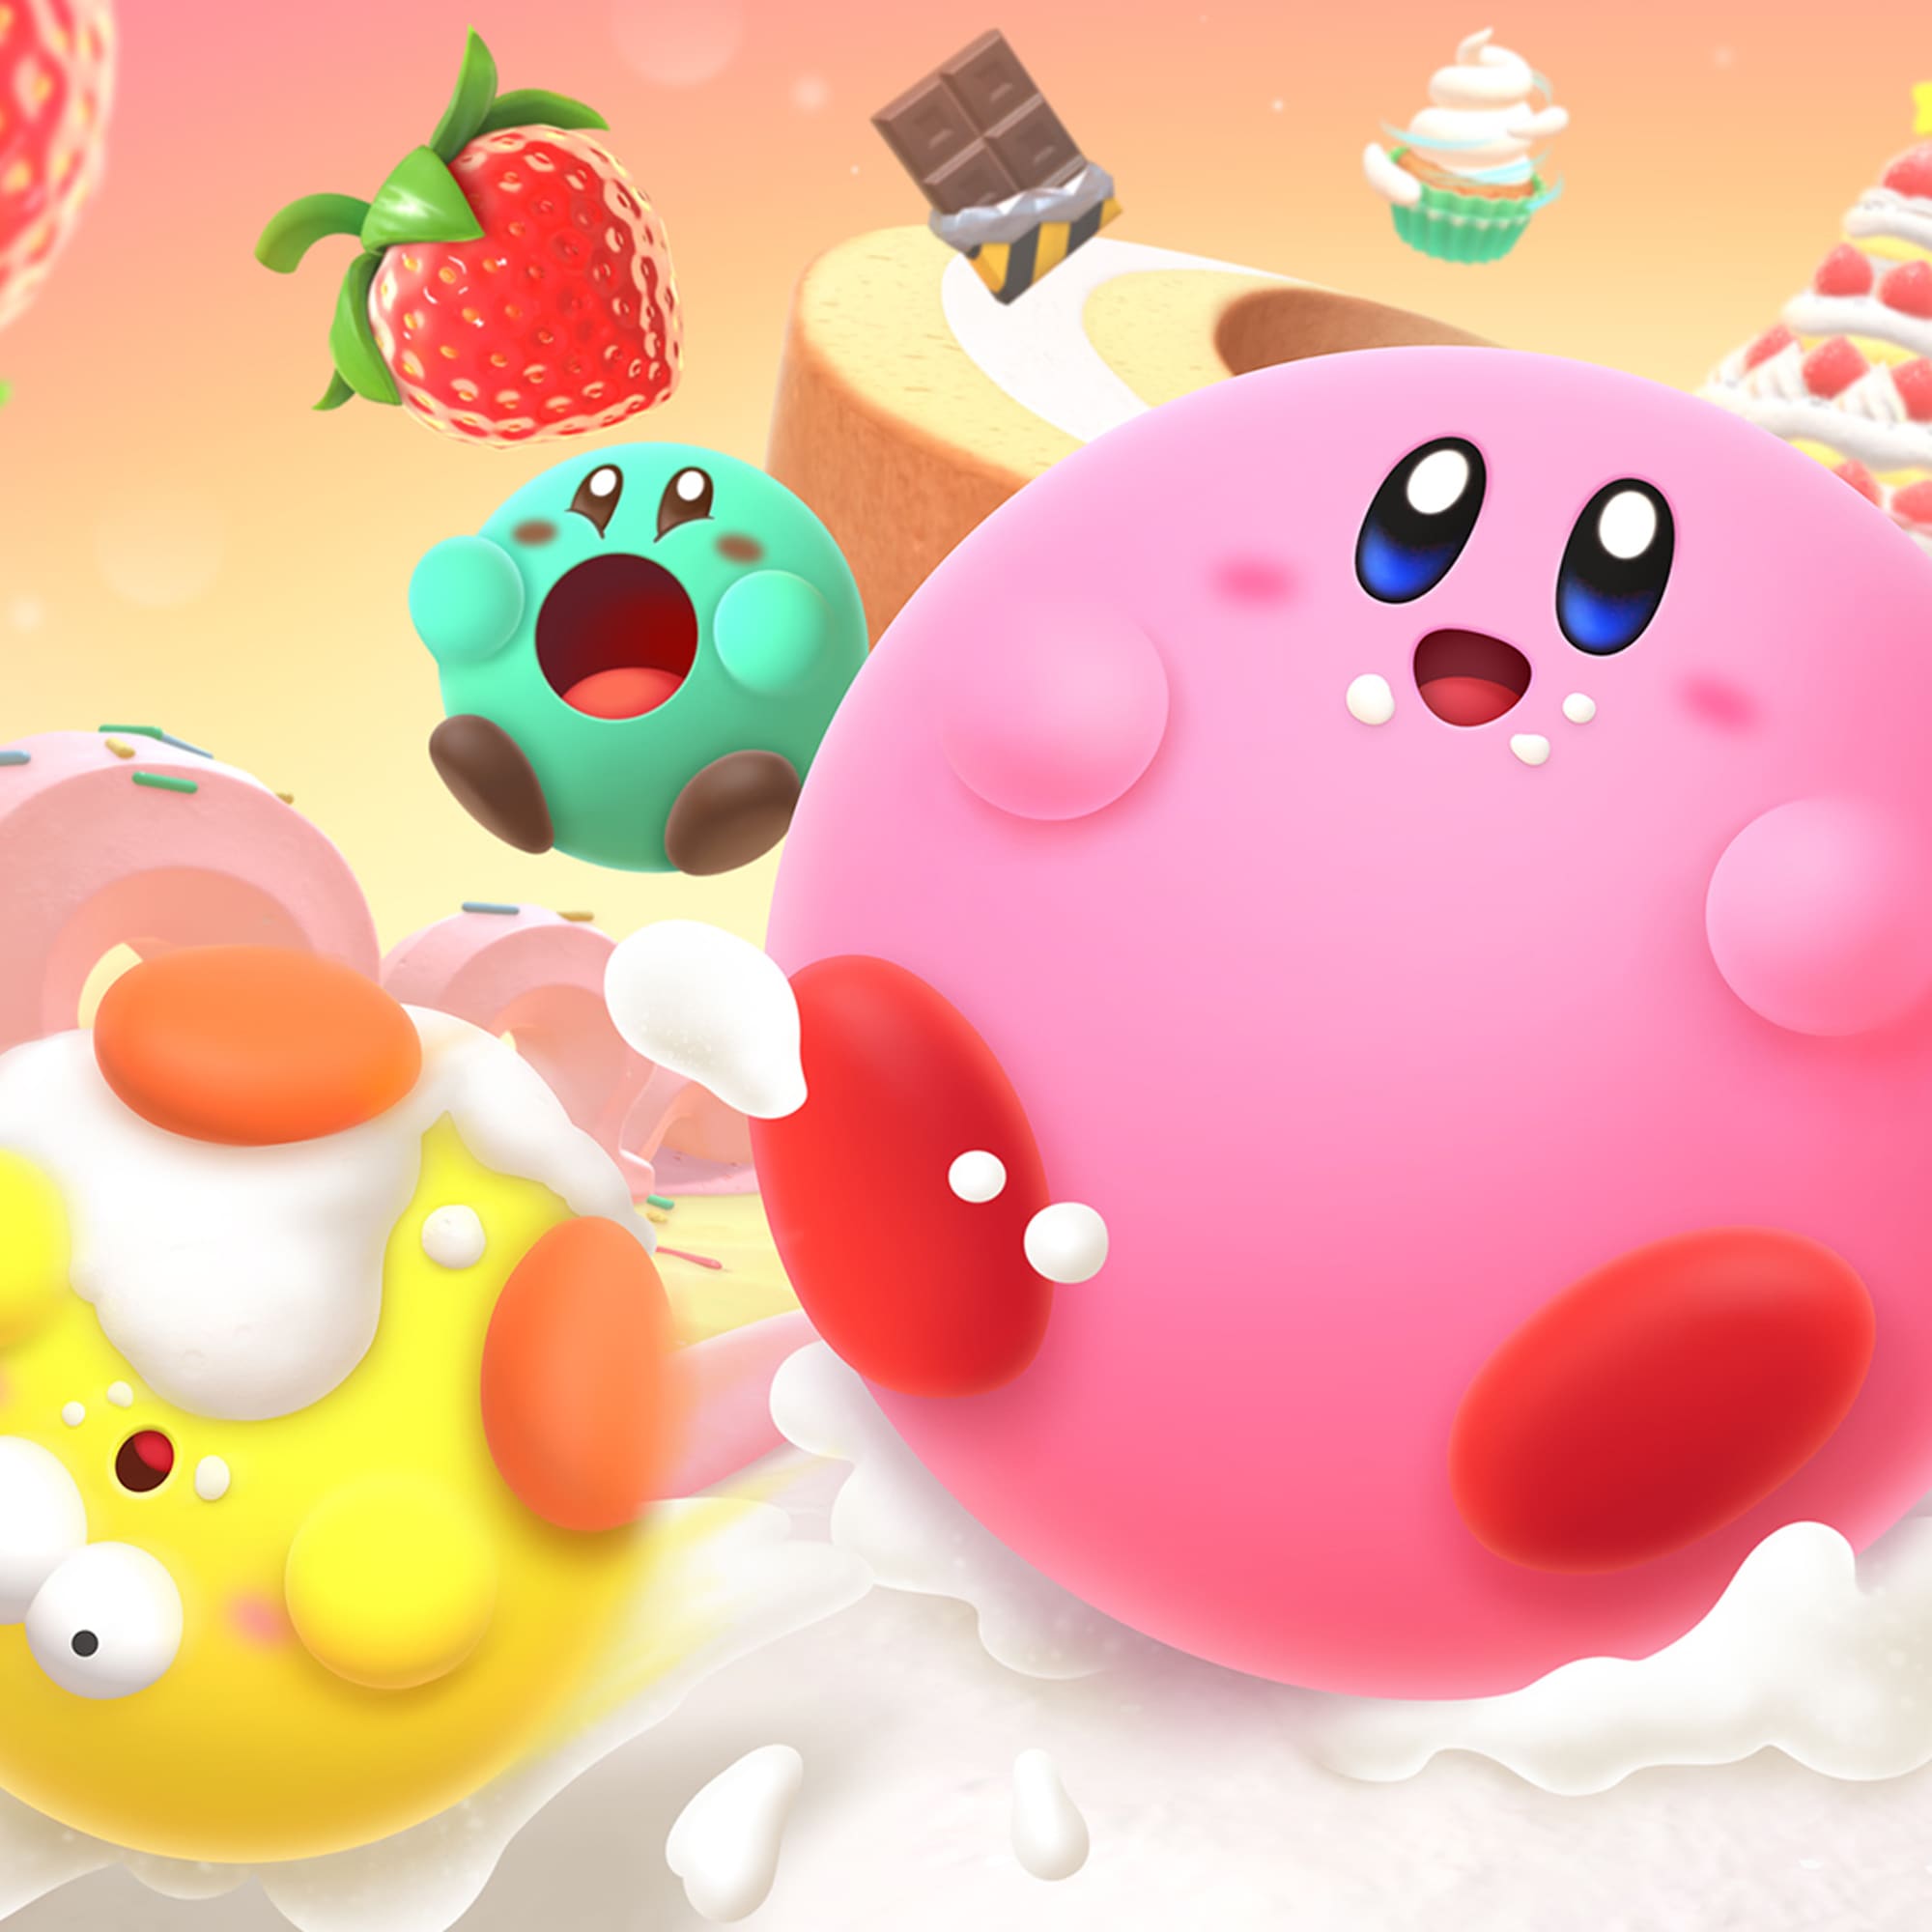 A yellow, green and giant pink Kirby racing on a track made of food in Kirby's Dream Buffet.